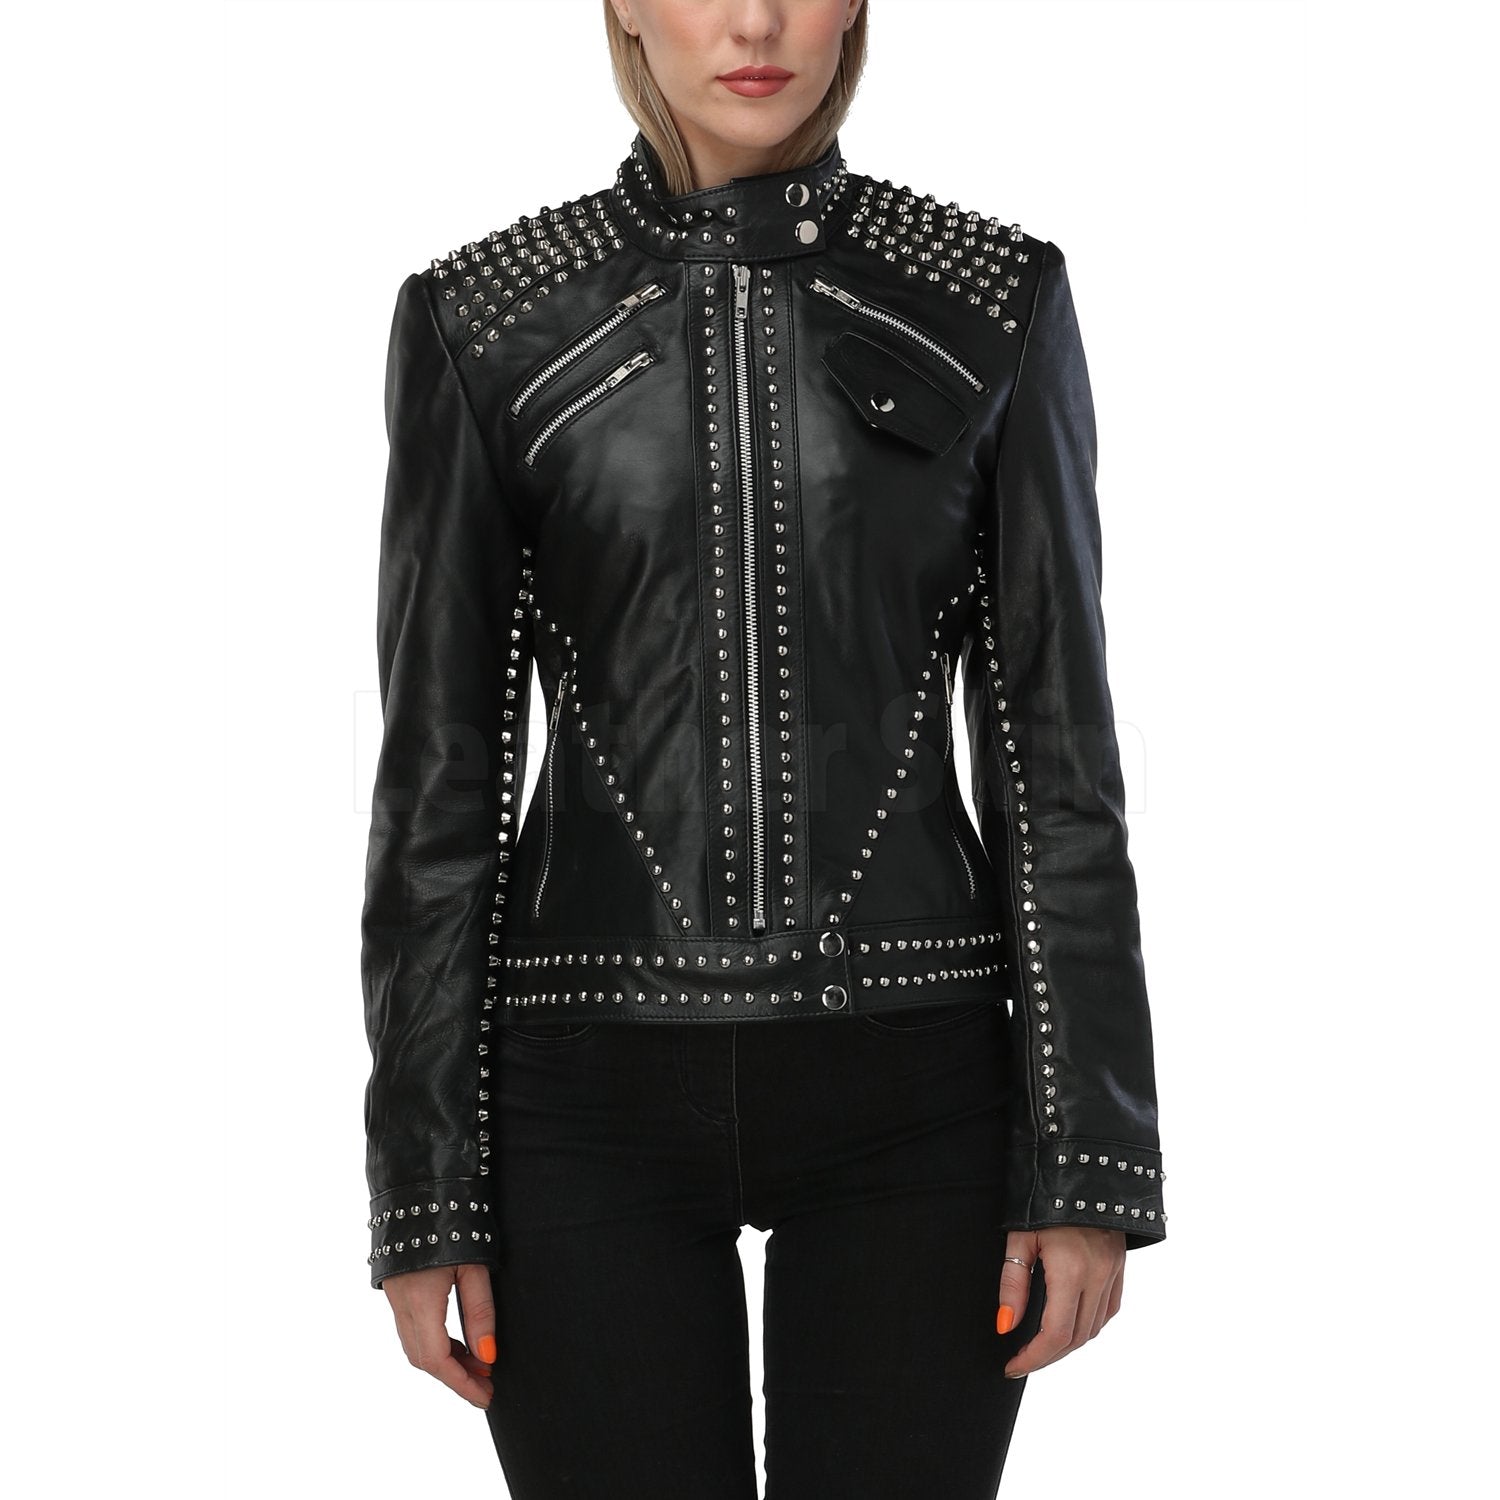 Spikes and Studded Leather Jacket for Men and Women in Real